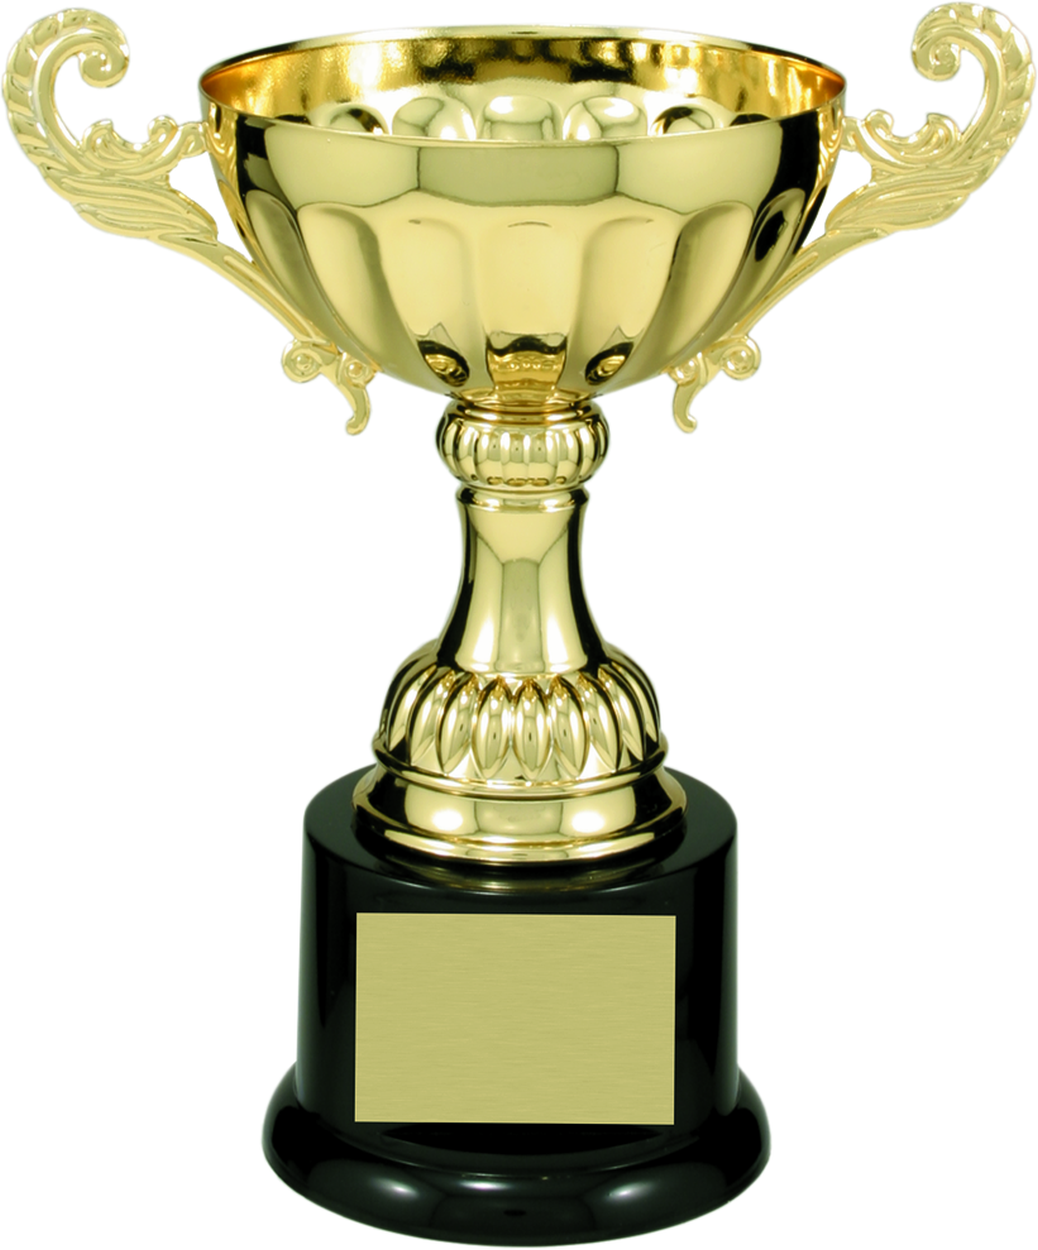 Shop & Personalize "Metal Cup Trophy Award 100 Series" at Dell Awards